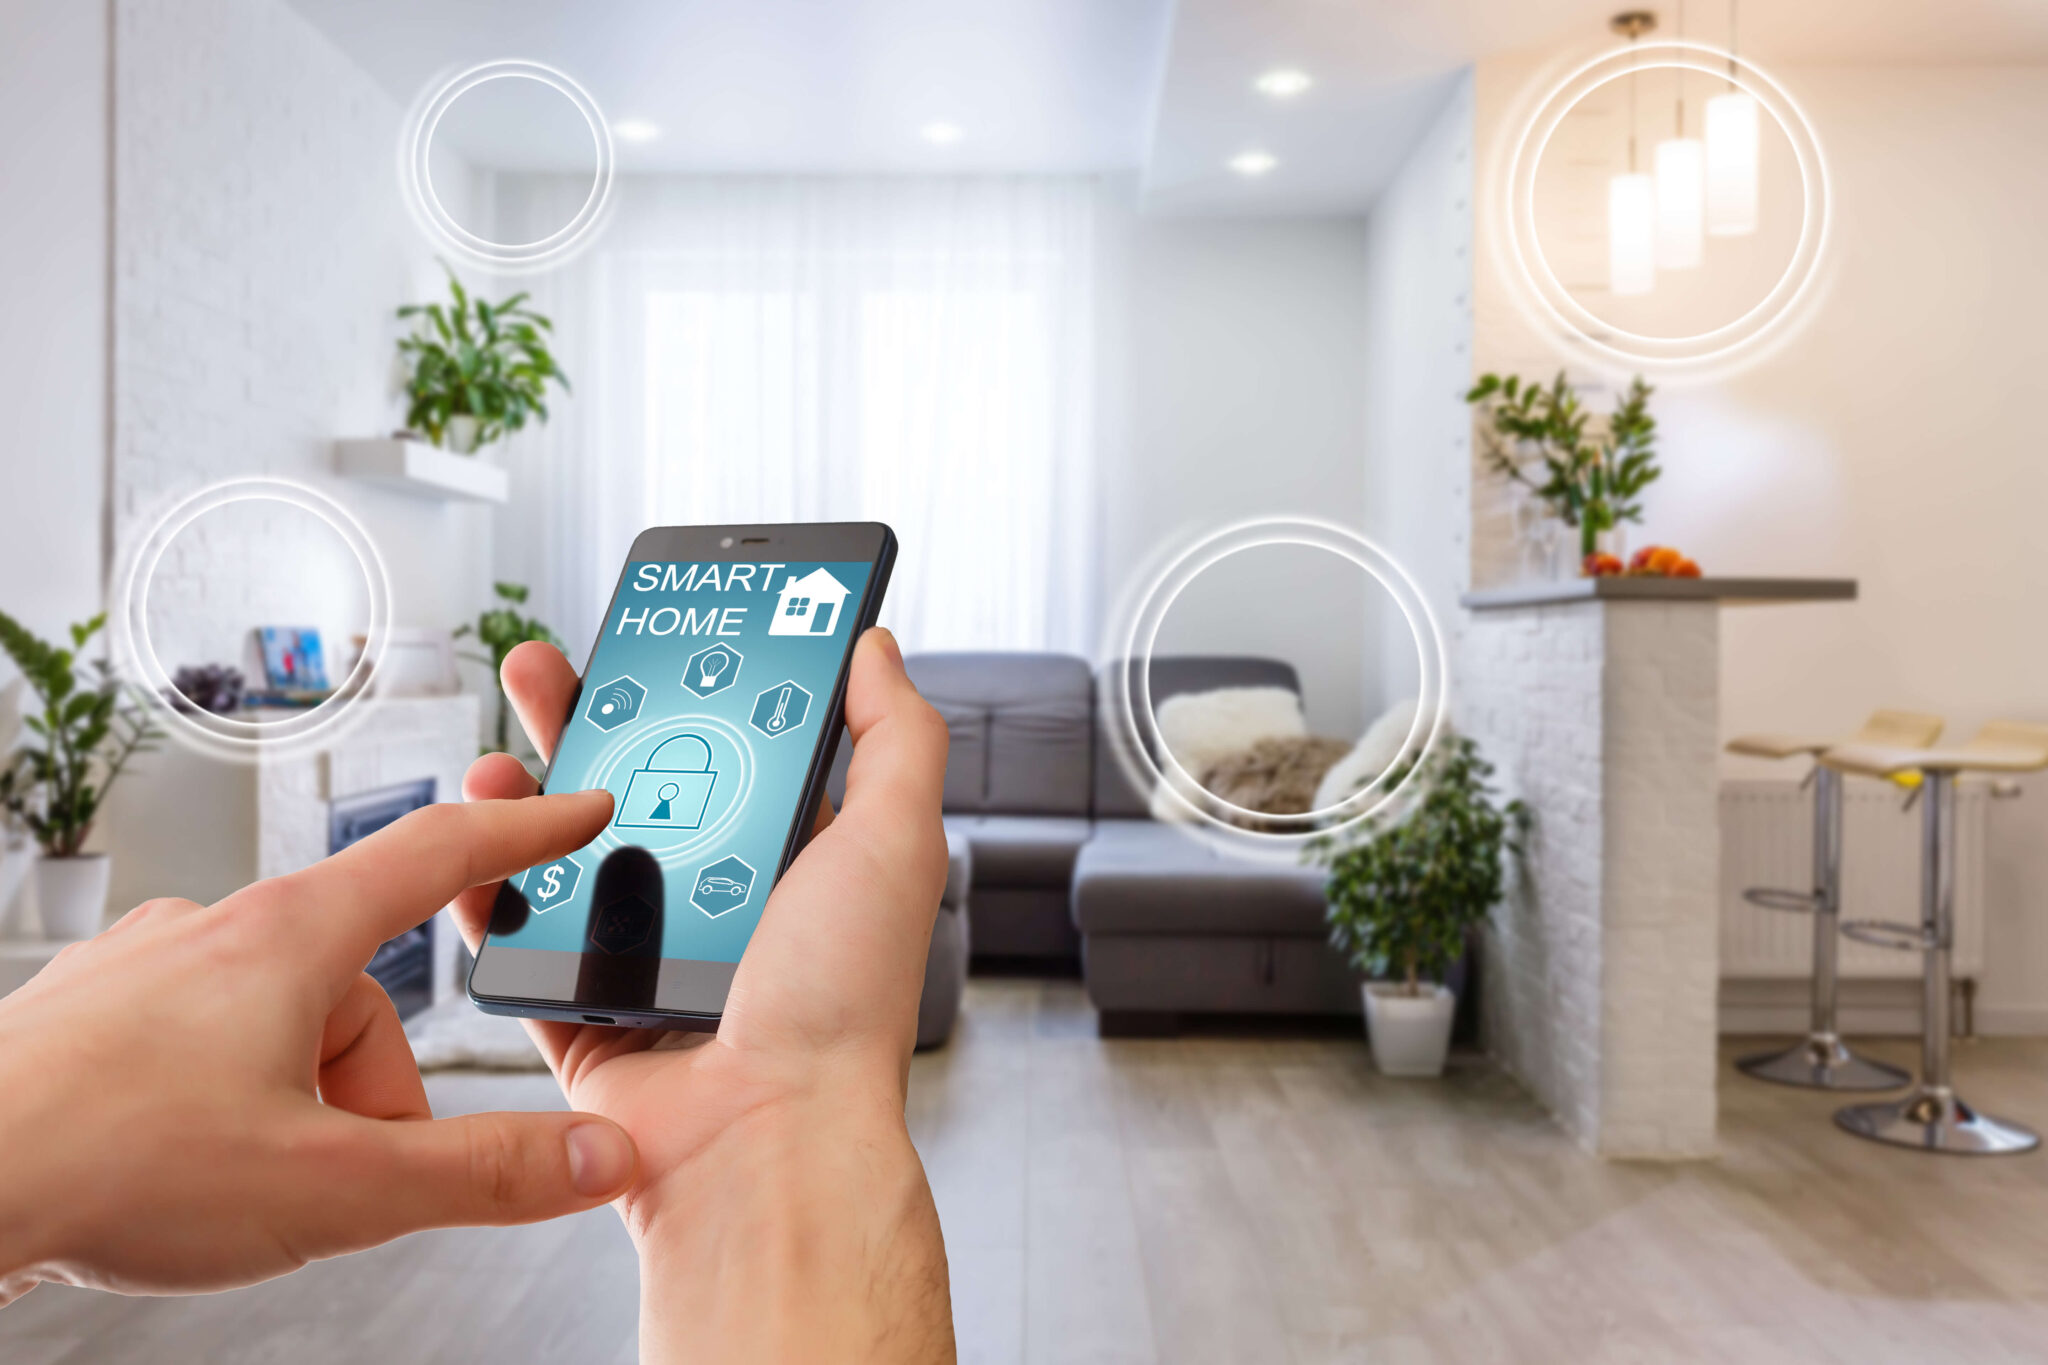 A person is using a smartphone to control smart home devices such as lights, thermostat, and door lock to save energy.